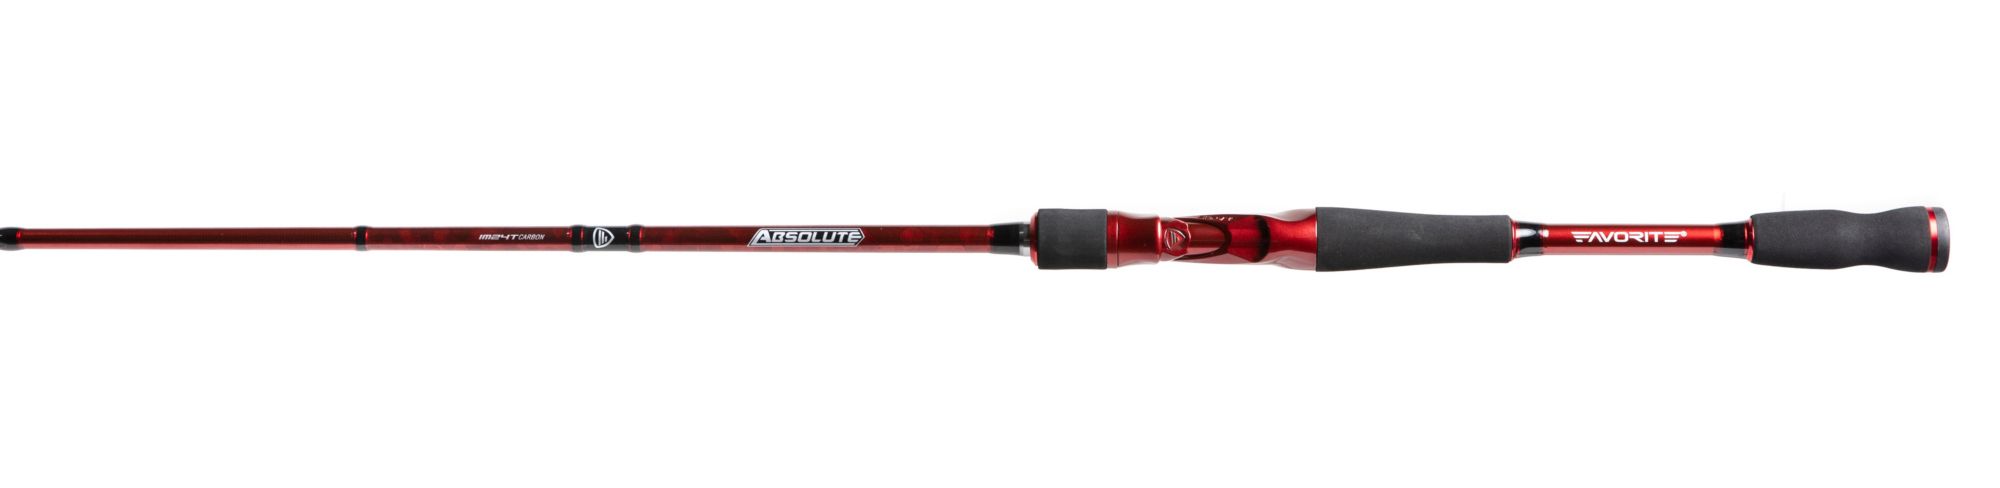 Dick's Sporting Goods Favorite Fishing Absolute Casting Rod (2021)